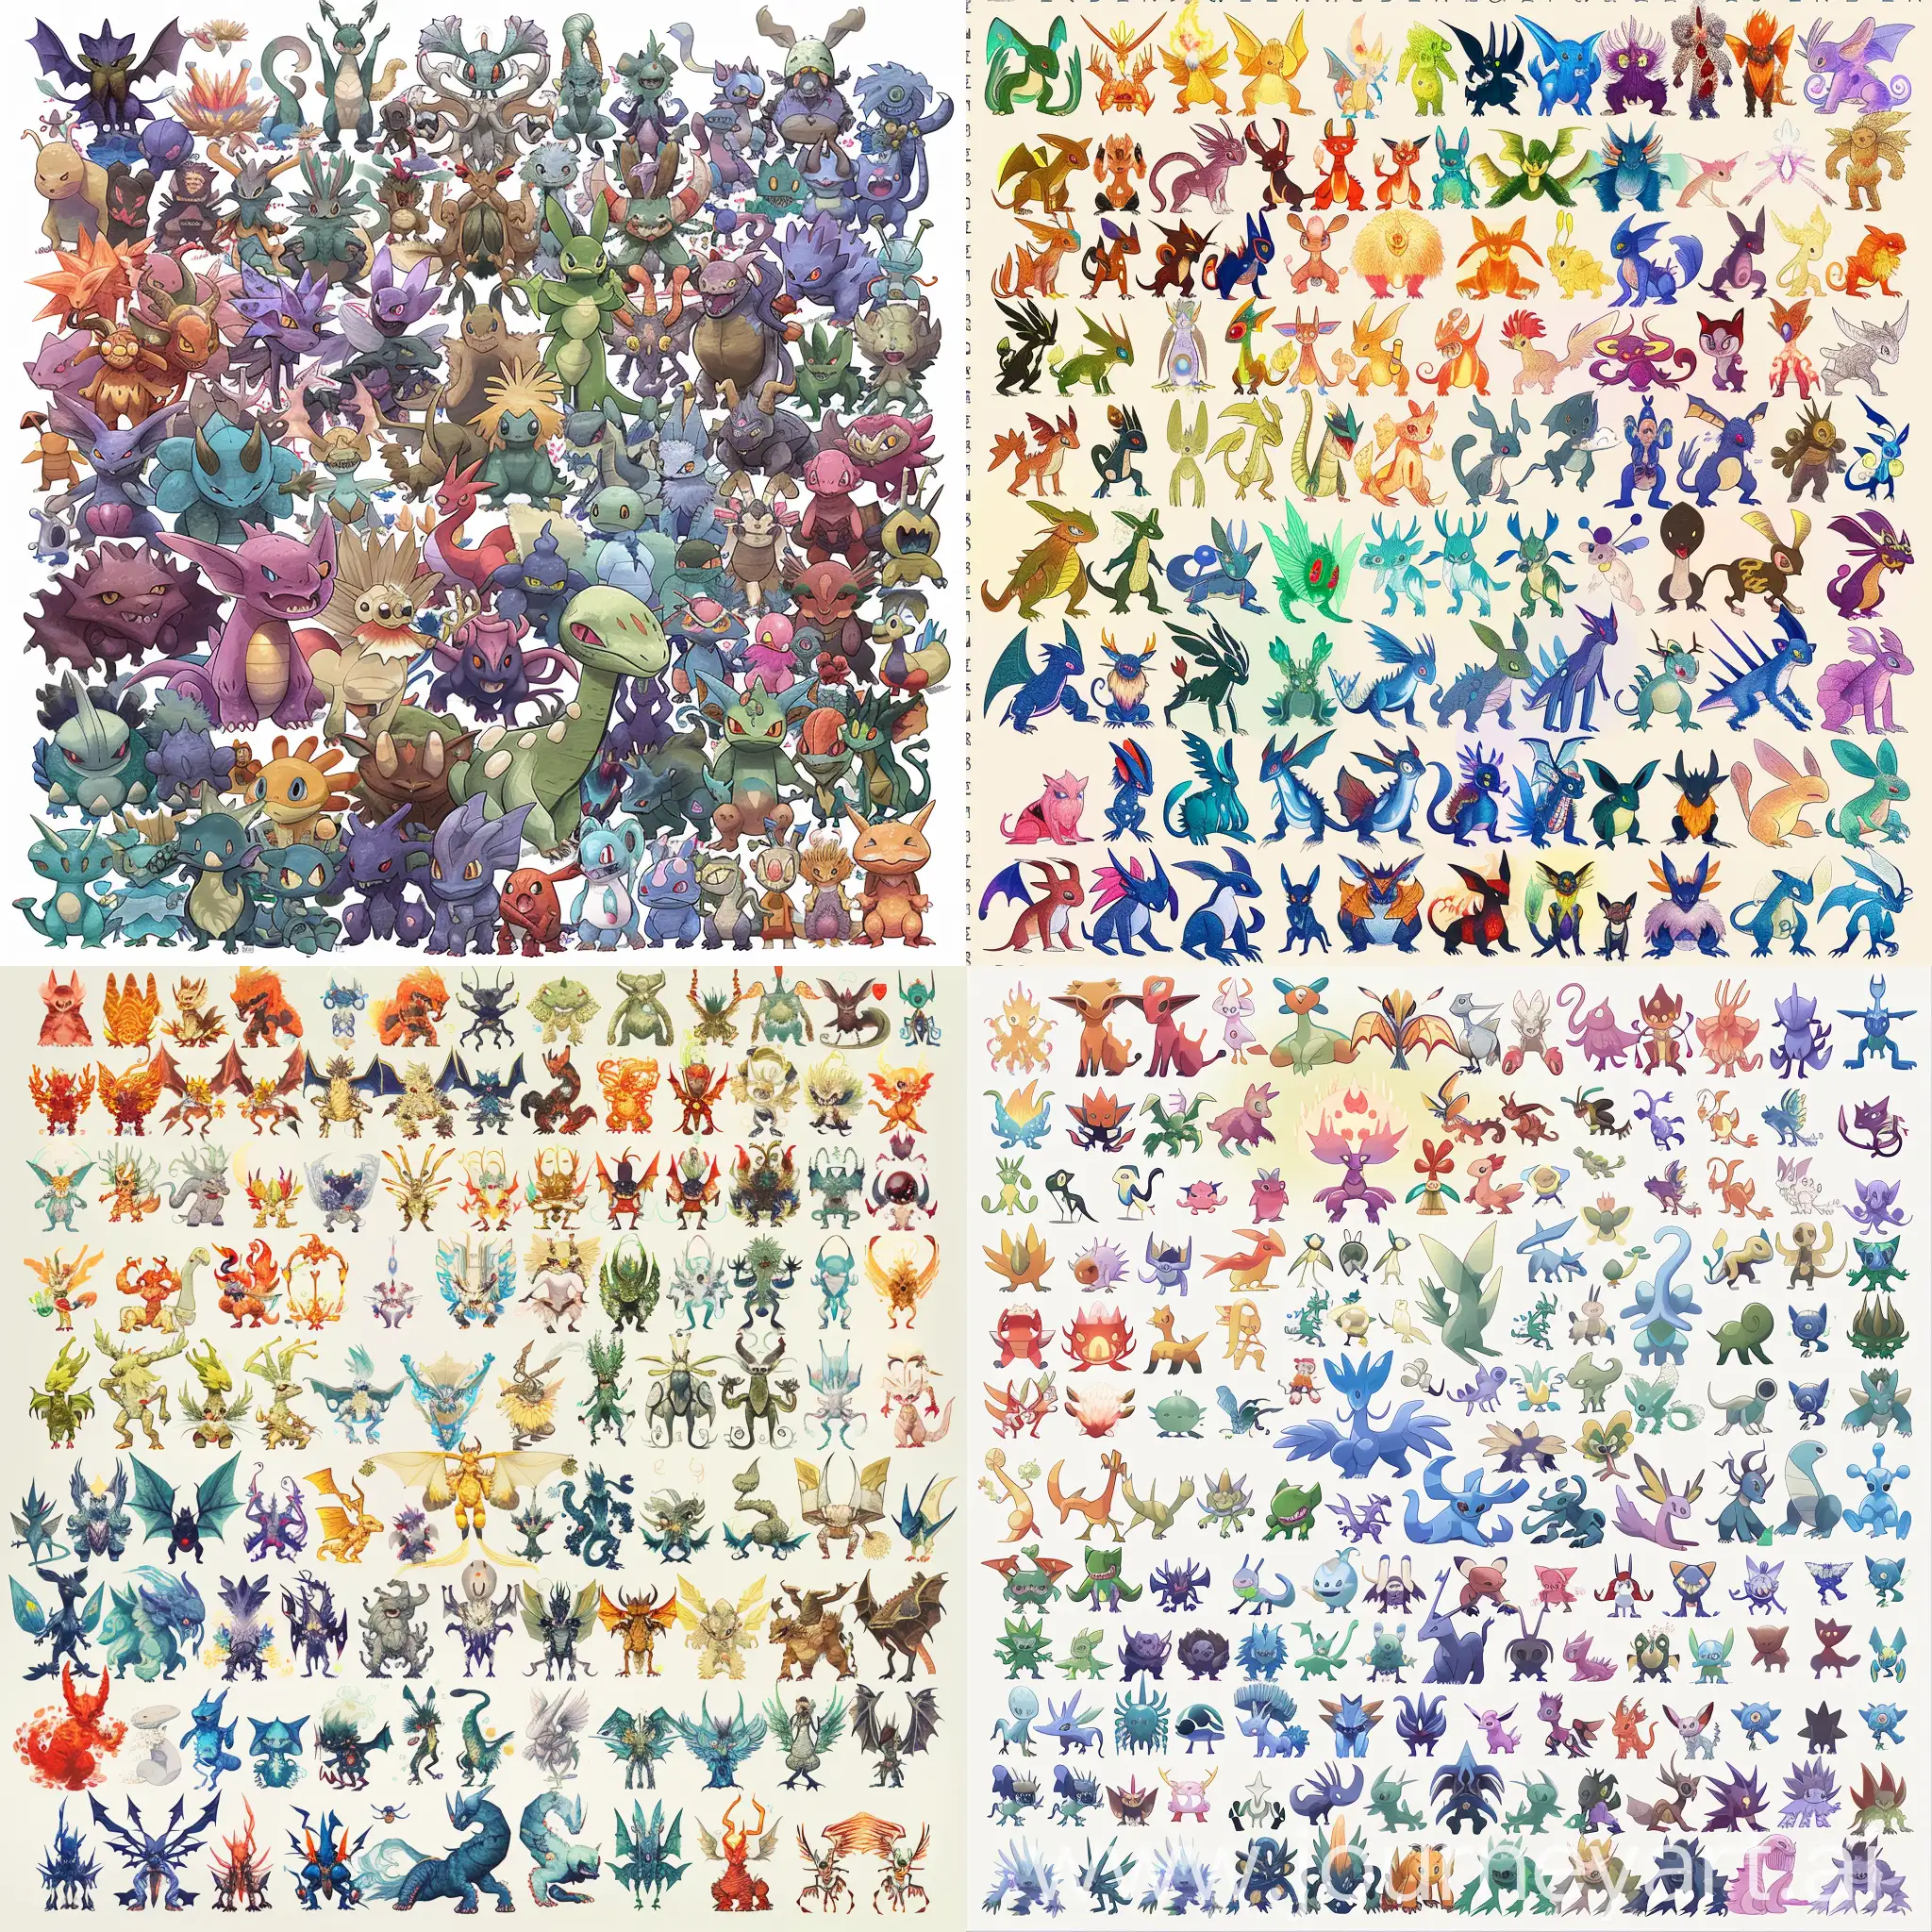 Create a picture with one hundred different types of creatures known as Luminals similar to Pokemon.